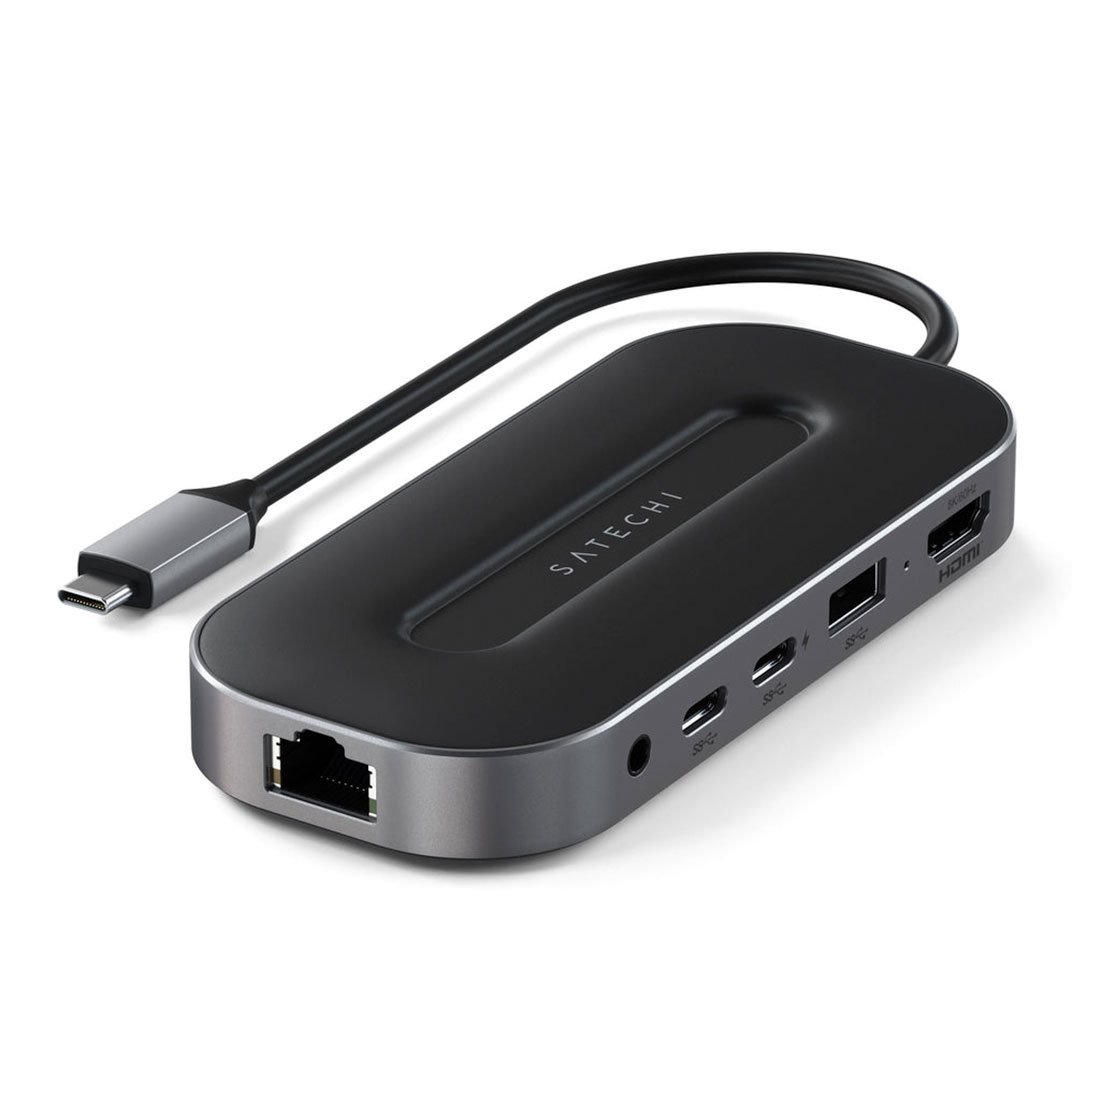 Satechi USB-4 Multiport Adapter with 2.5G Ethernet - Space Gray Aluminium